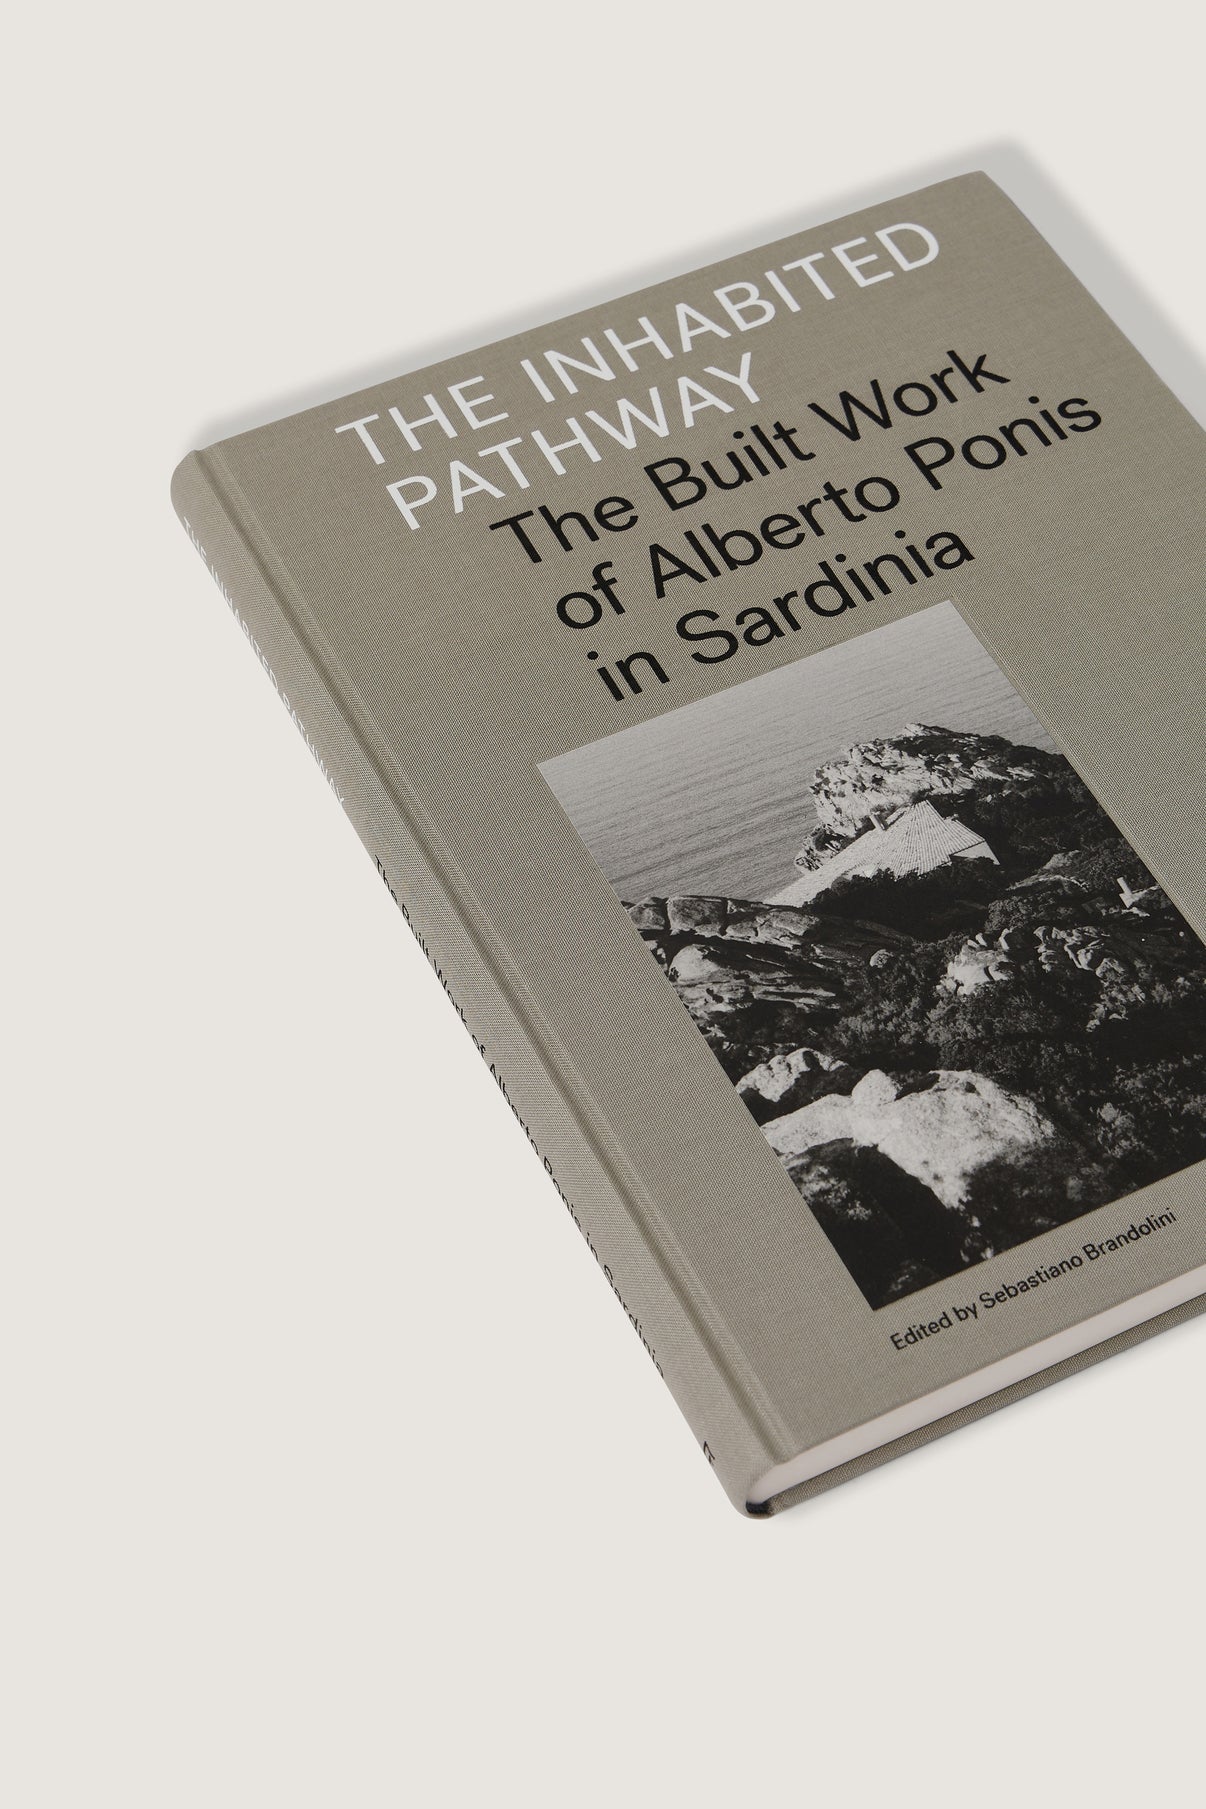 BOOK "THE INHABITED PATHWAY : THE BUILT WORK OF ALBERTO PONIS IN SARDINIA" vue 2